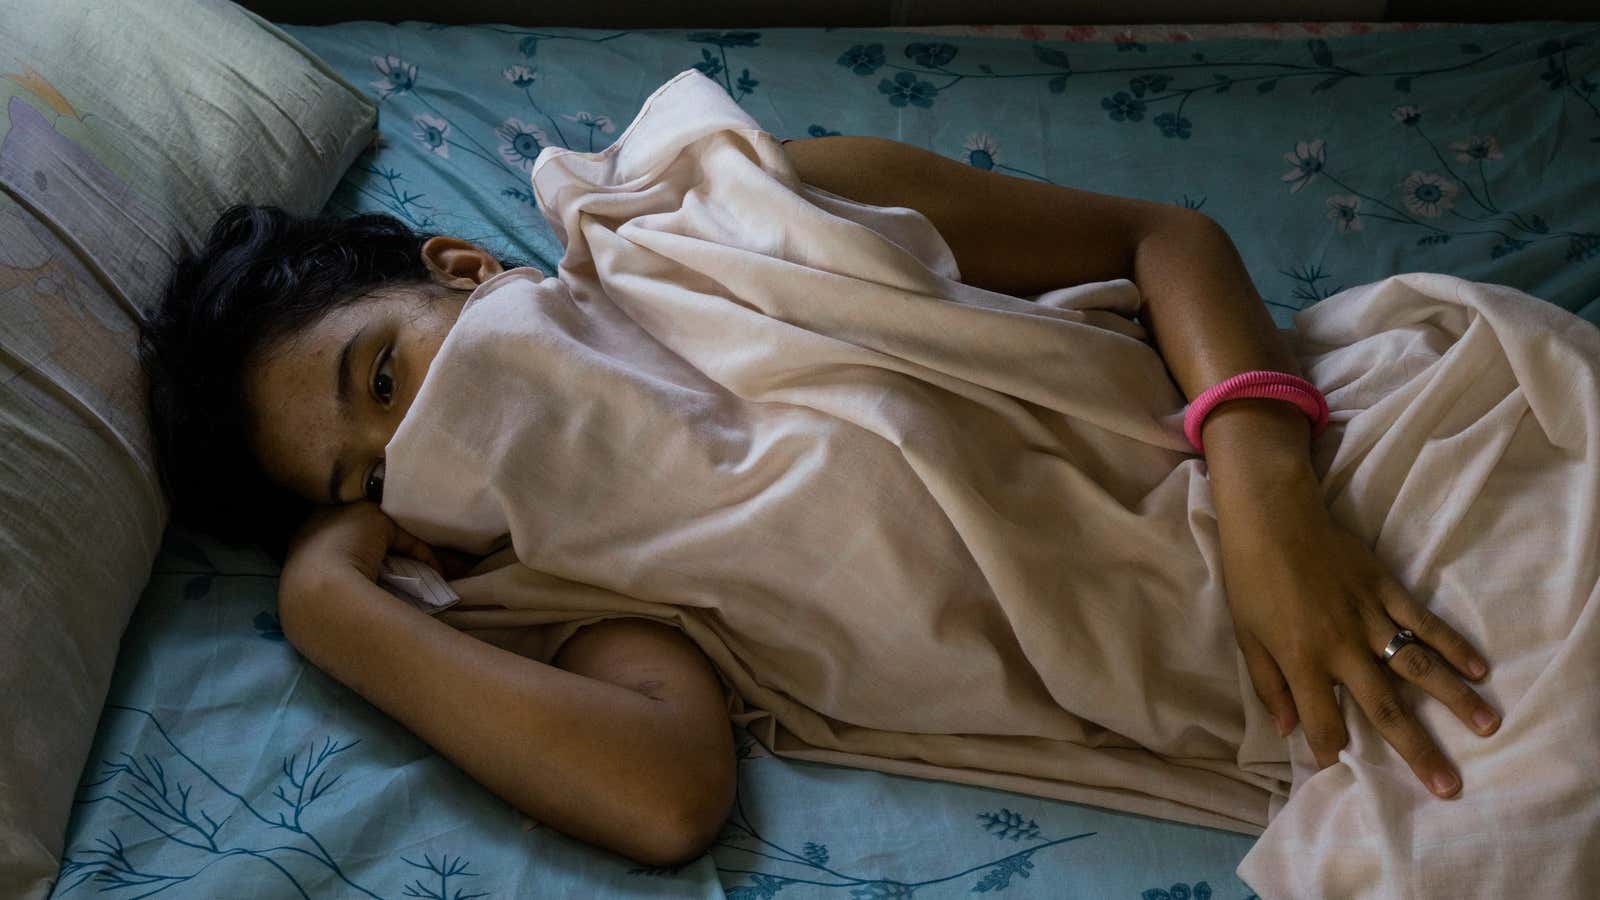 Young girls from climate-change-vulnerable areas in the Philippines wind up in the sex trade after being displaced from storms.